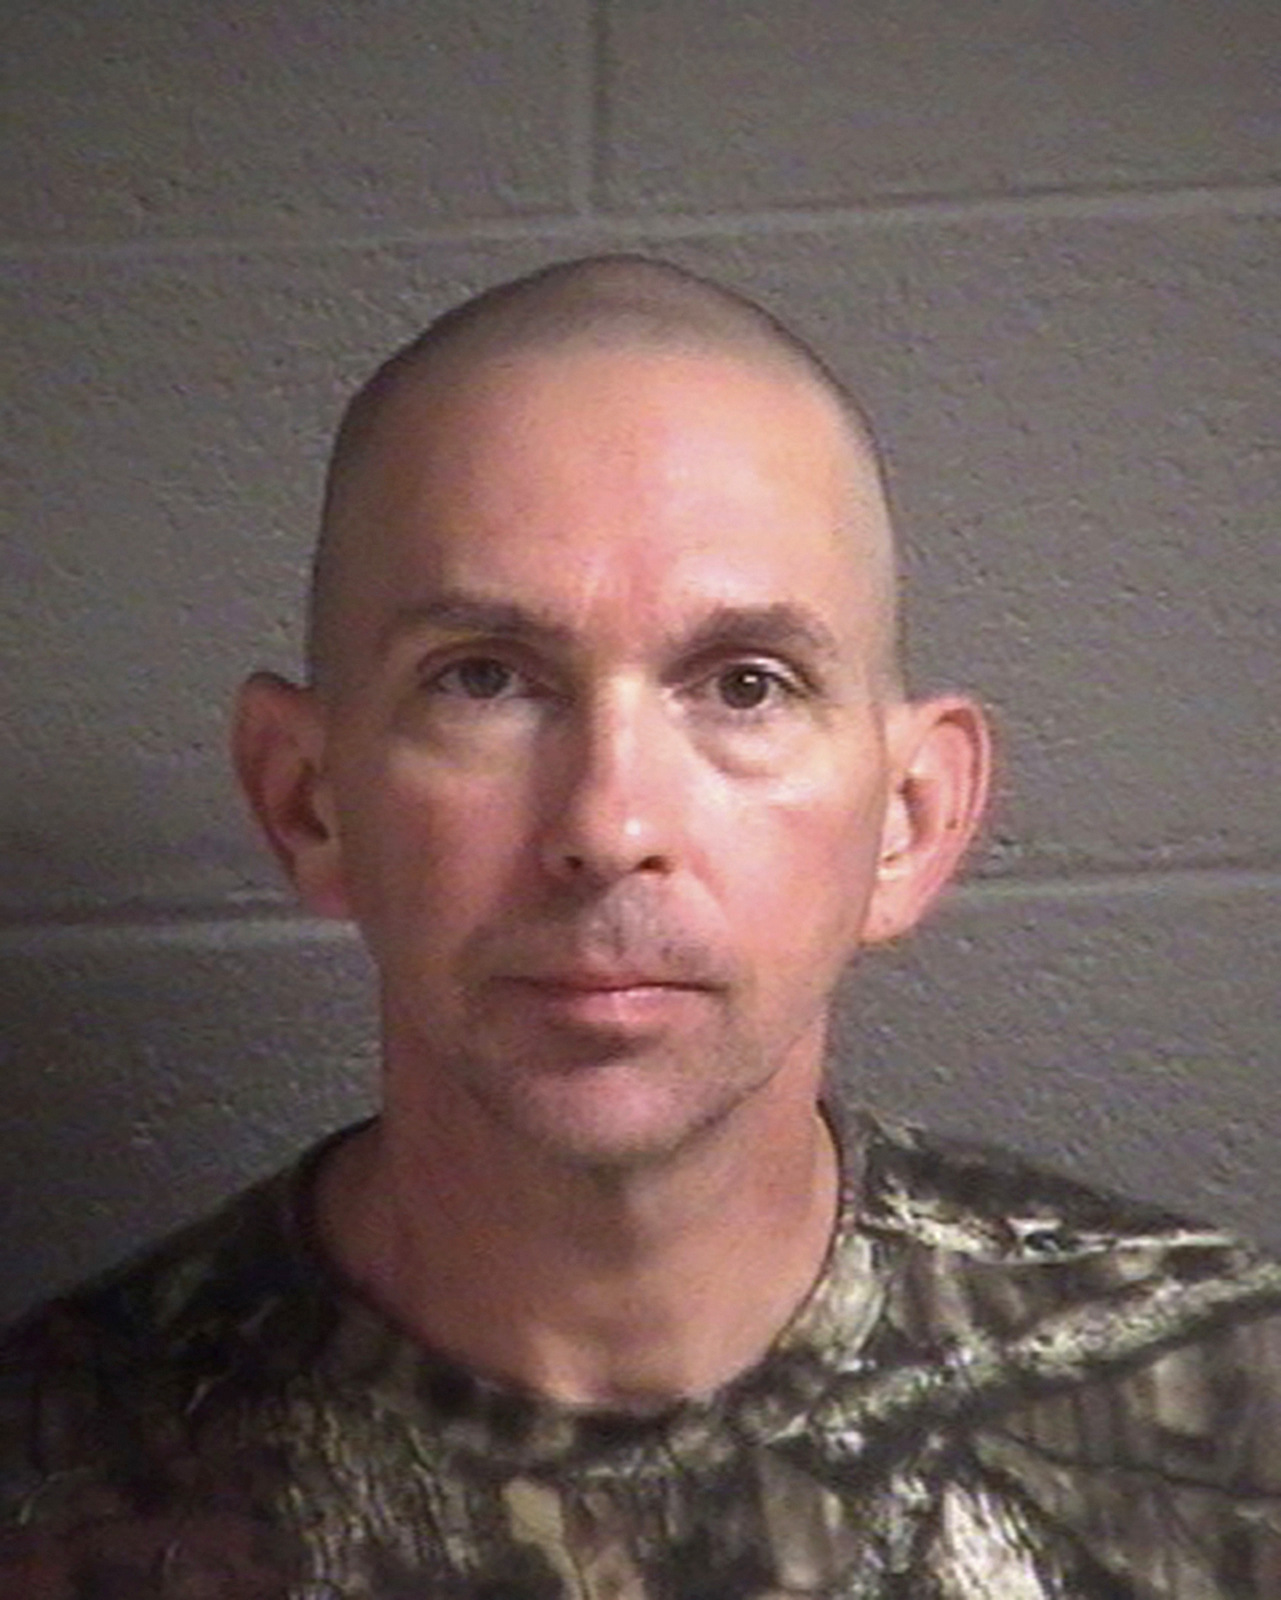 Michael Christopher Estes, who’s accused of planting an improvised explosive device at the airport on Friday, Oct. 6, 2017, in Asheville, N.C. A criminal complaint in federal court accuses Estes of attempted malicious use of explosive materials and unlawful possession of explosives at the airport. (Buncombe County Detention Center via AP)